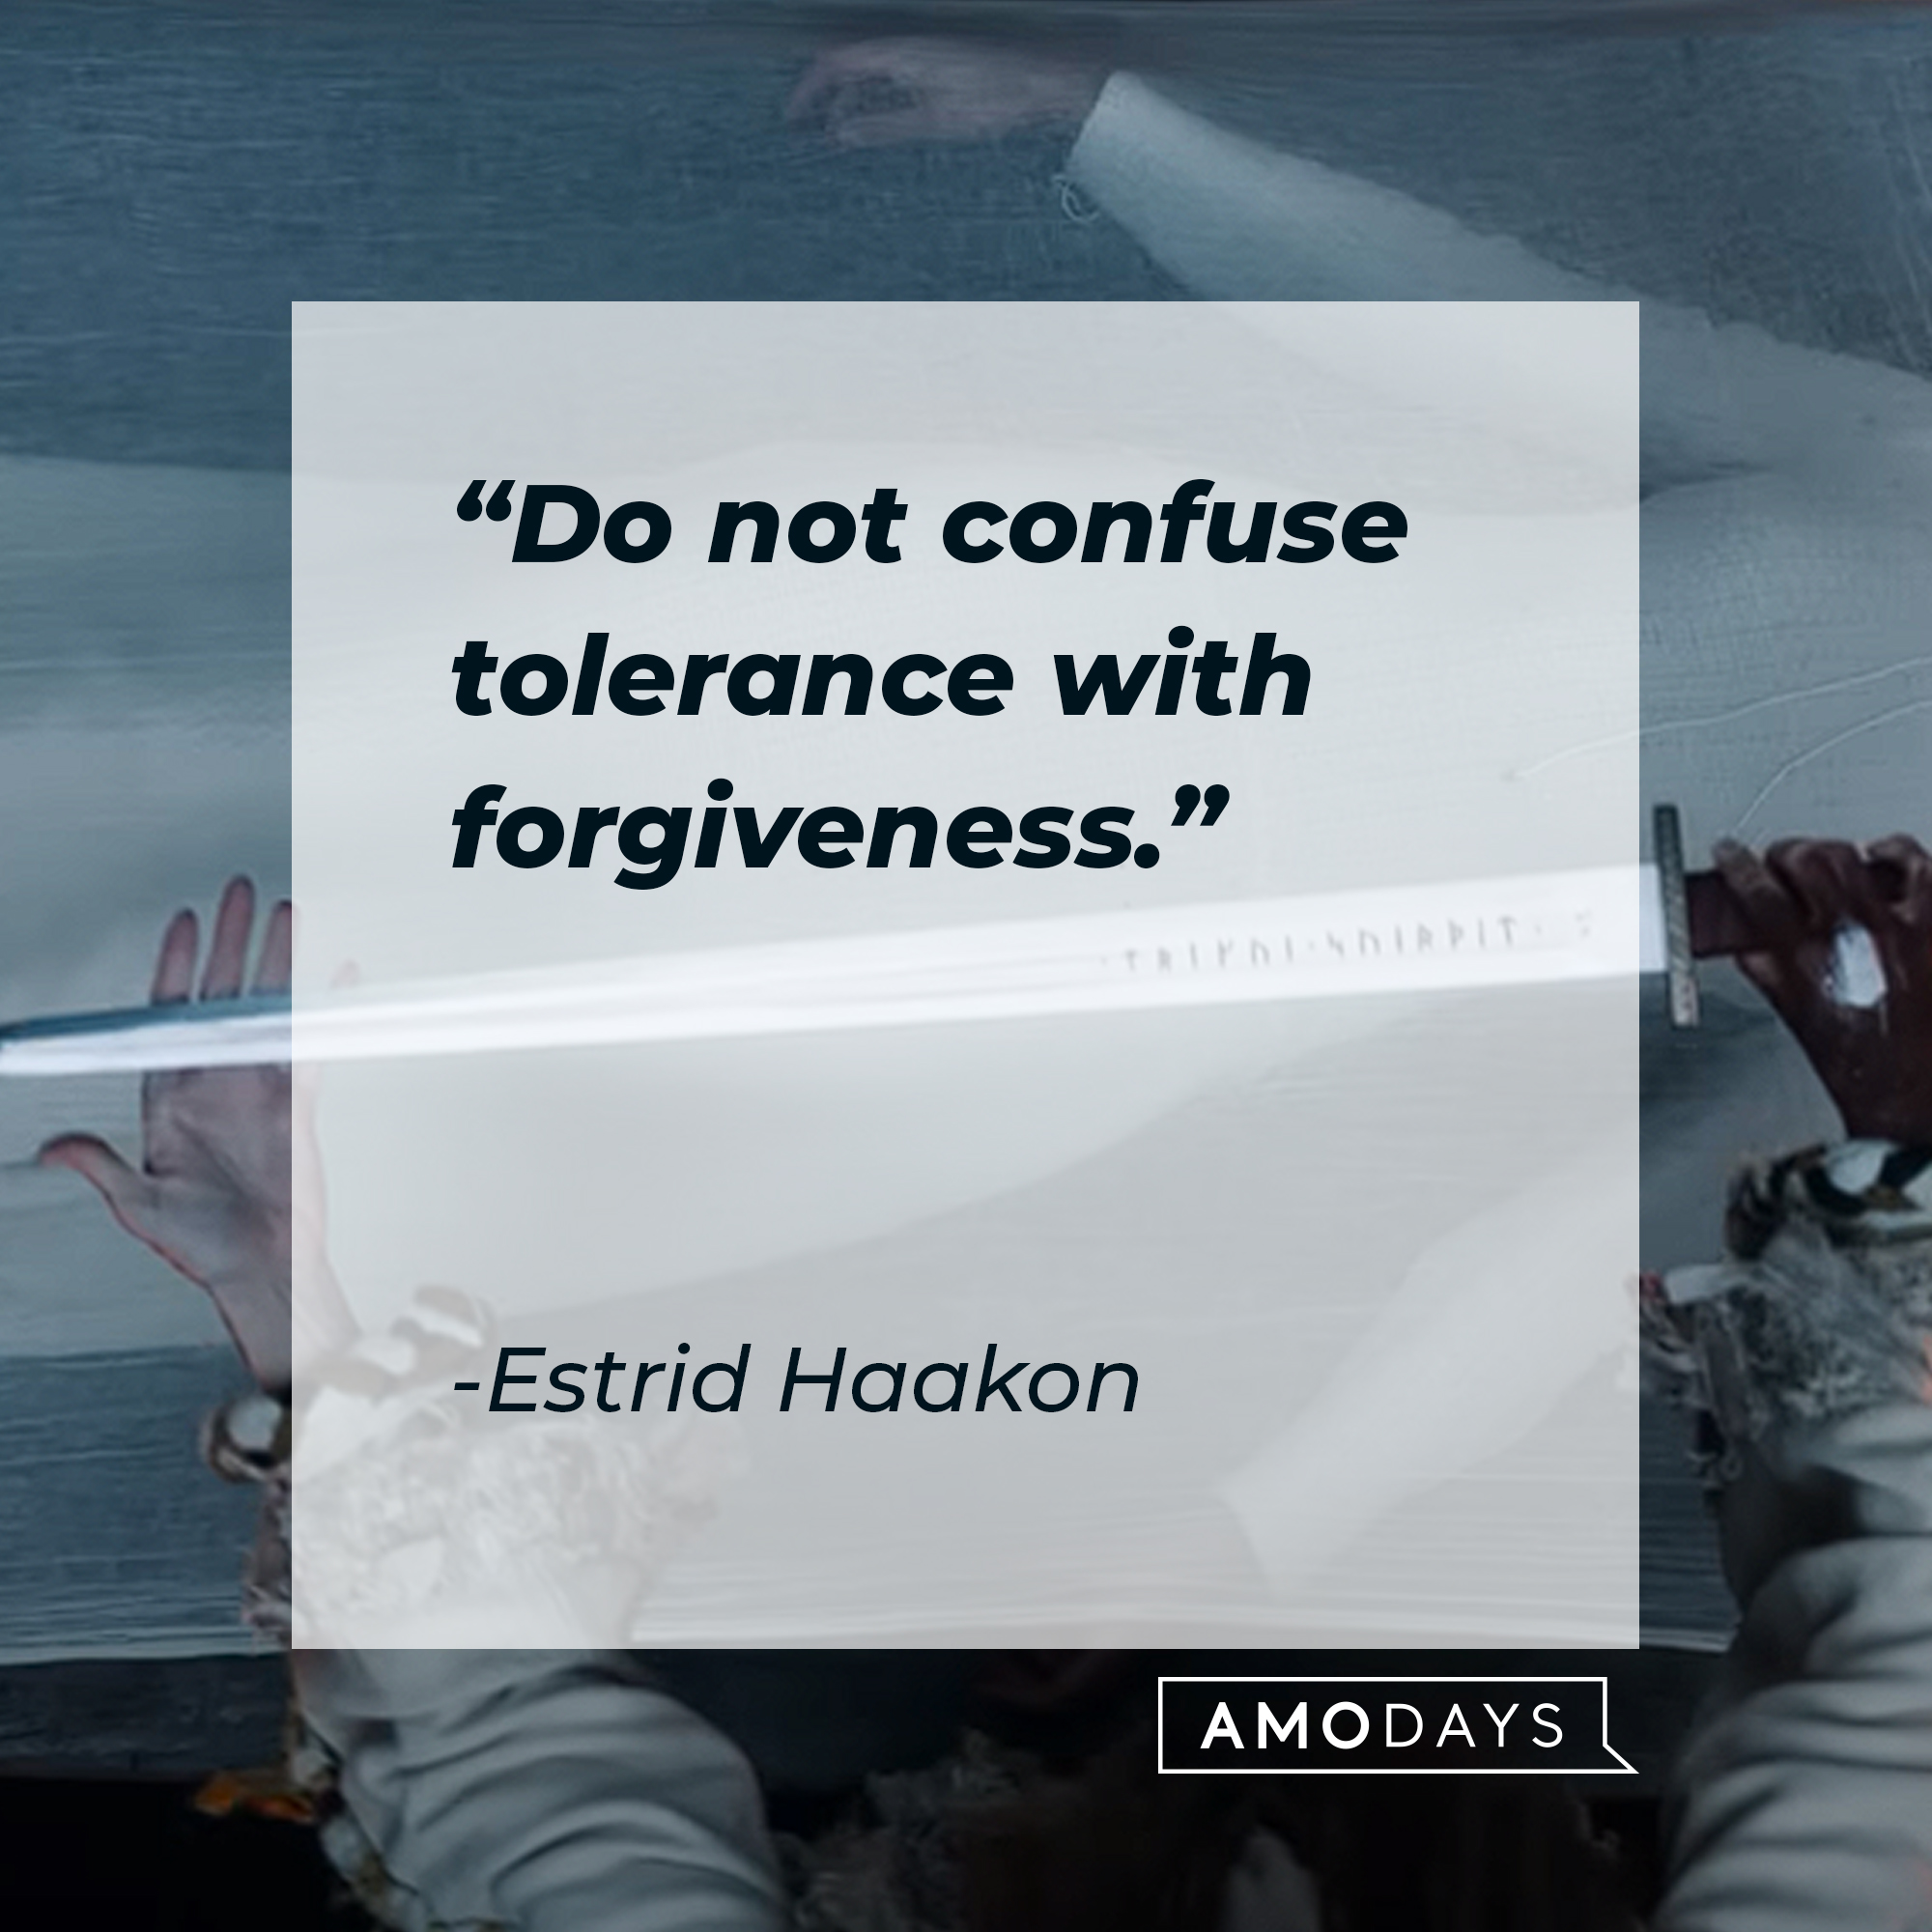 A picture from the series “Vikings: Valhalla” with a quote from Estrid Haakon: “Do not confuse tolerance with forgiveness.” | Source: youtube.com/Netflix